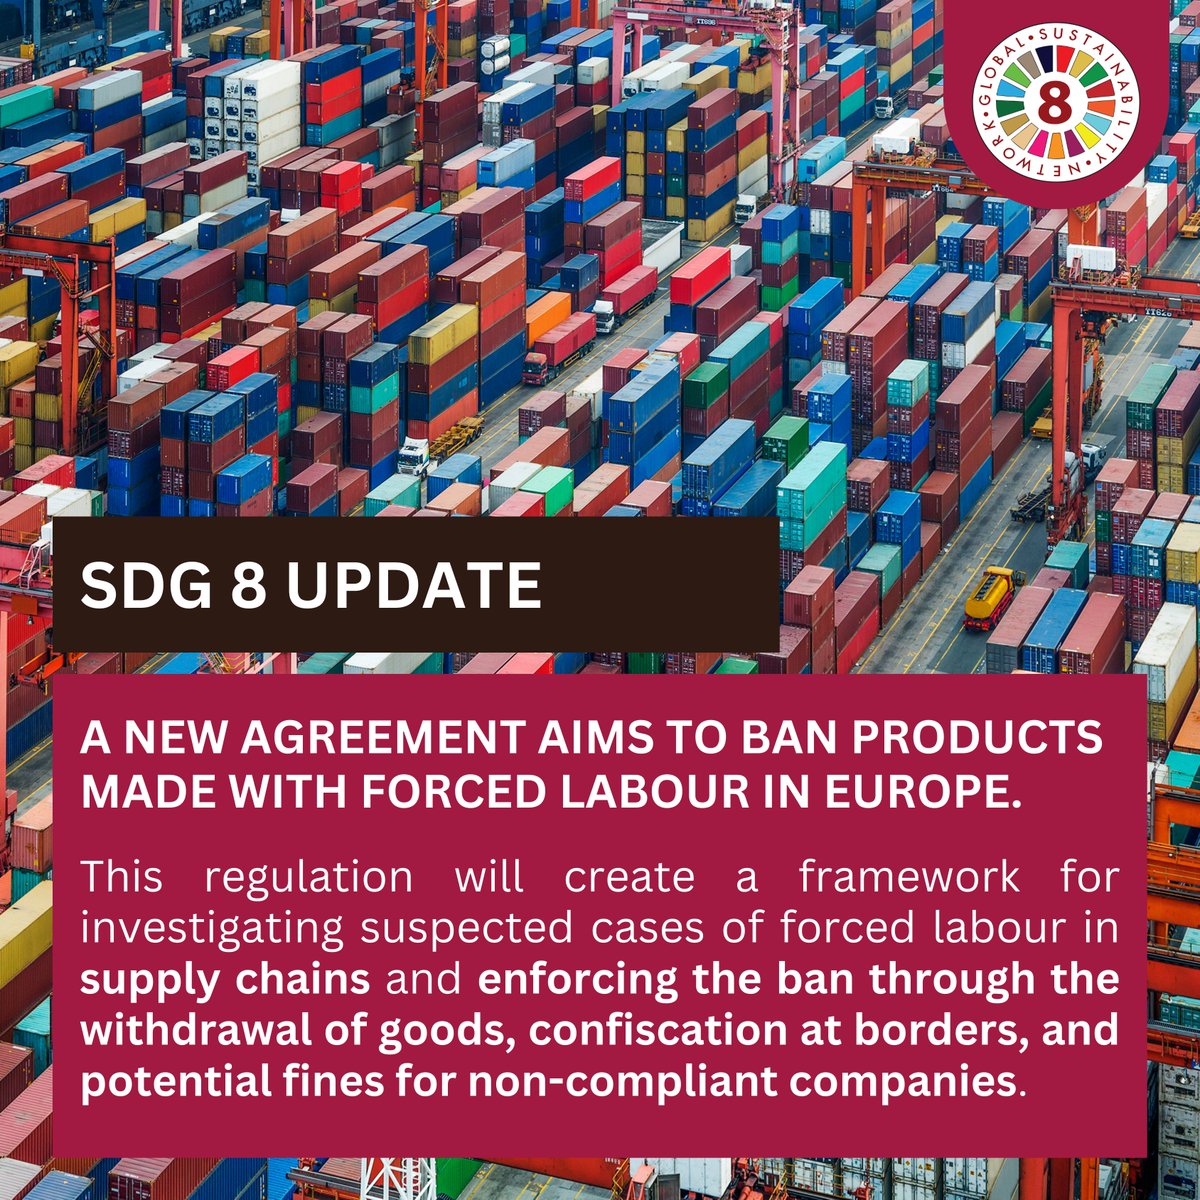 Europe takes a stand against forced labour! The new agreement establishes a robust framework to investigate, confiscate, and penalize non-compliant products, ensuring ethical supply chains and upholding SDG 8. Let's work together for fair labour practices worldwide! #EndSlavery